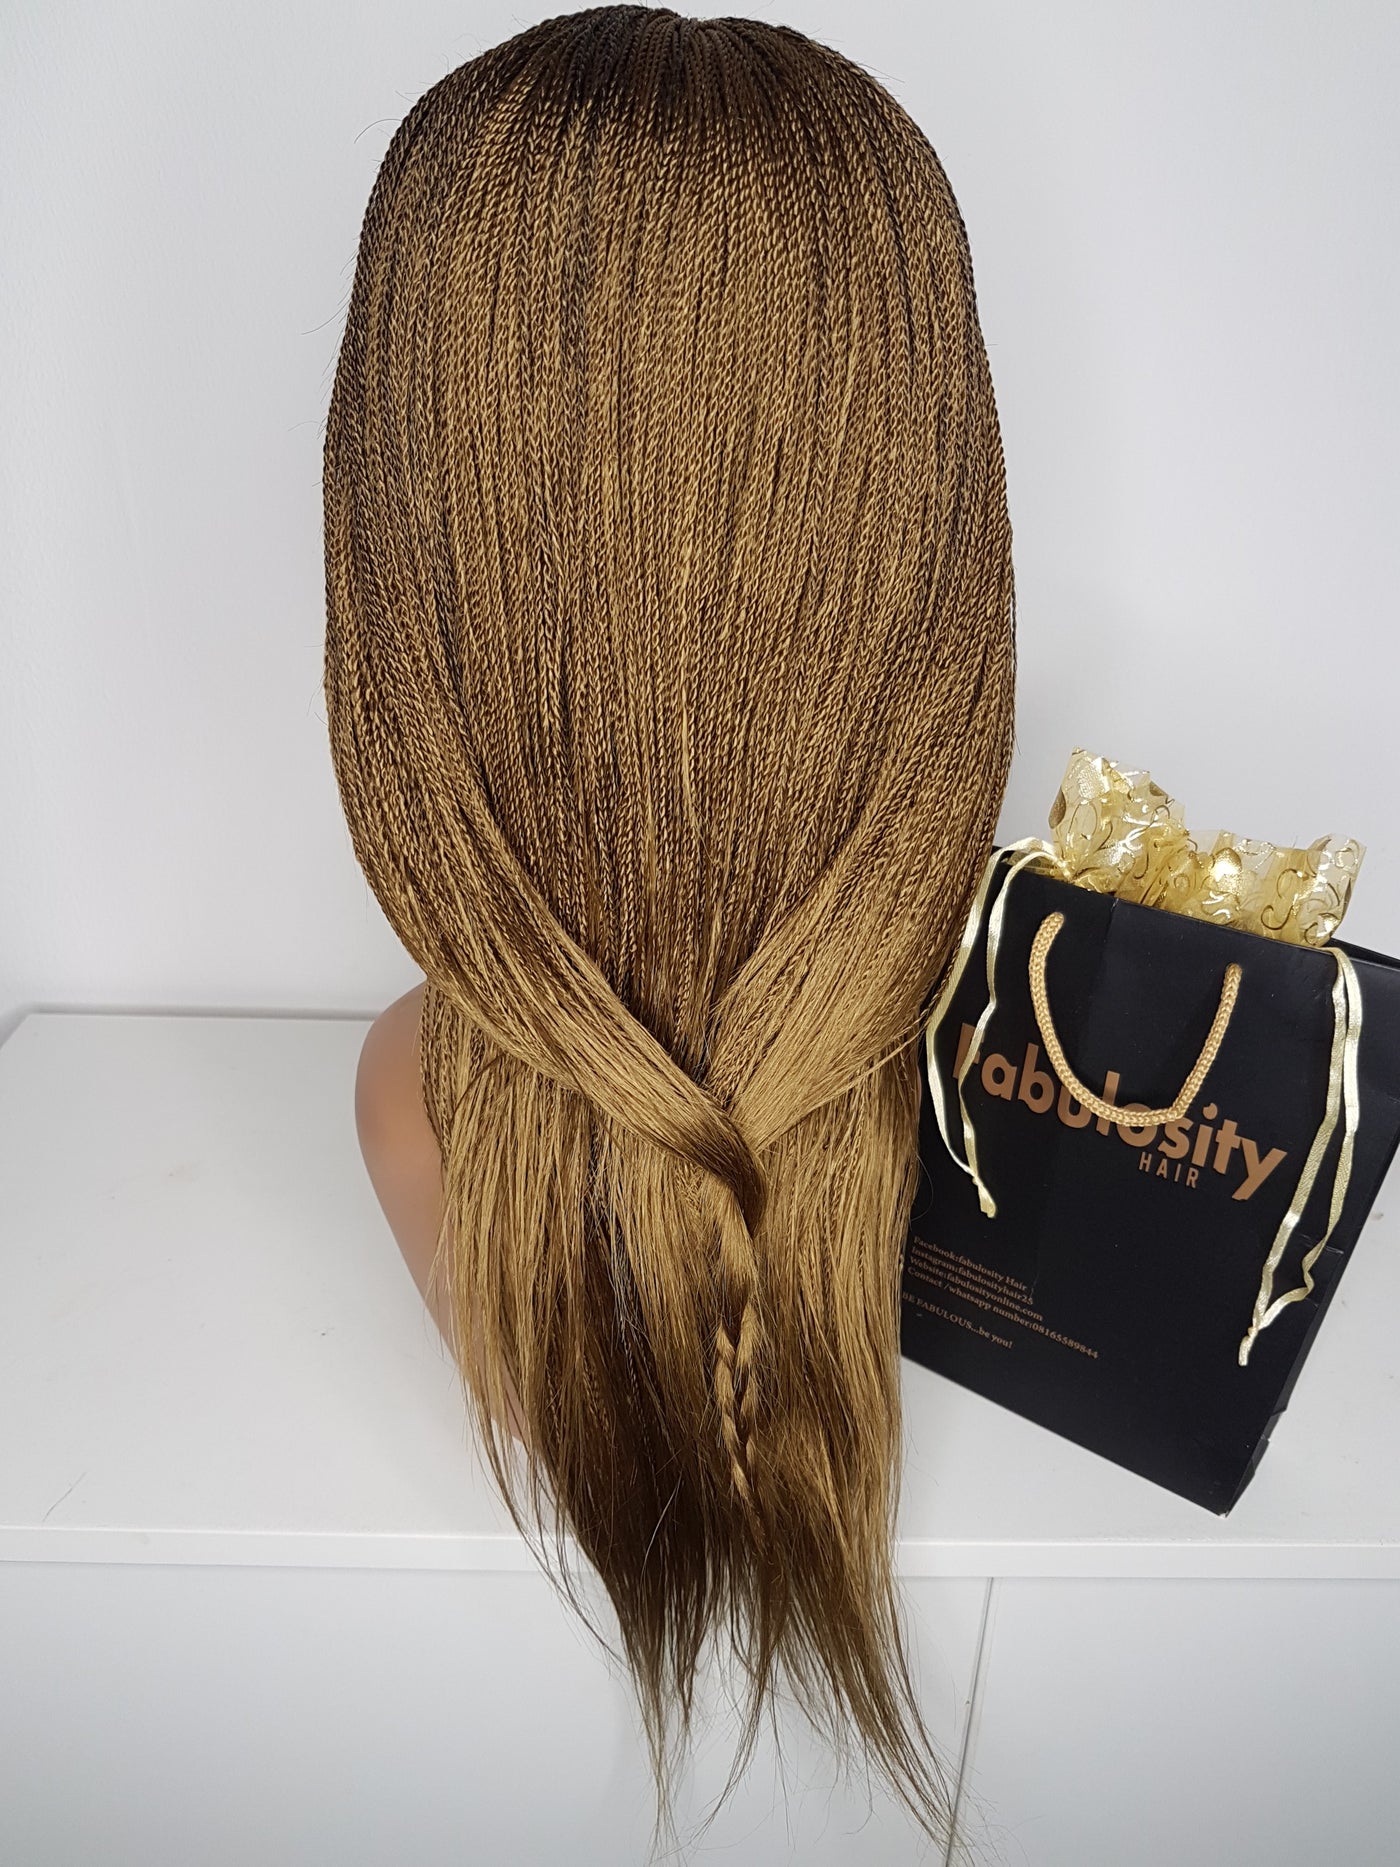 Braided wig in light brown colour